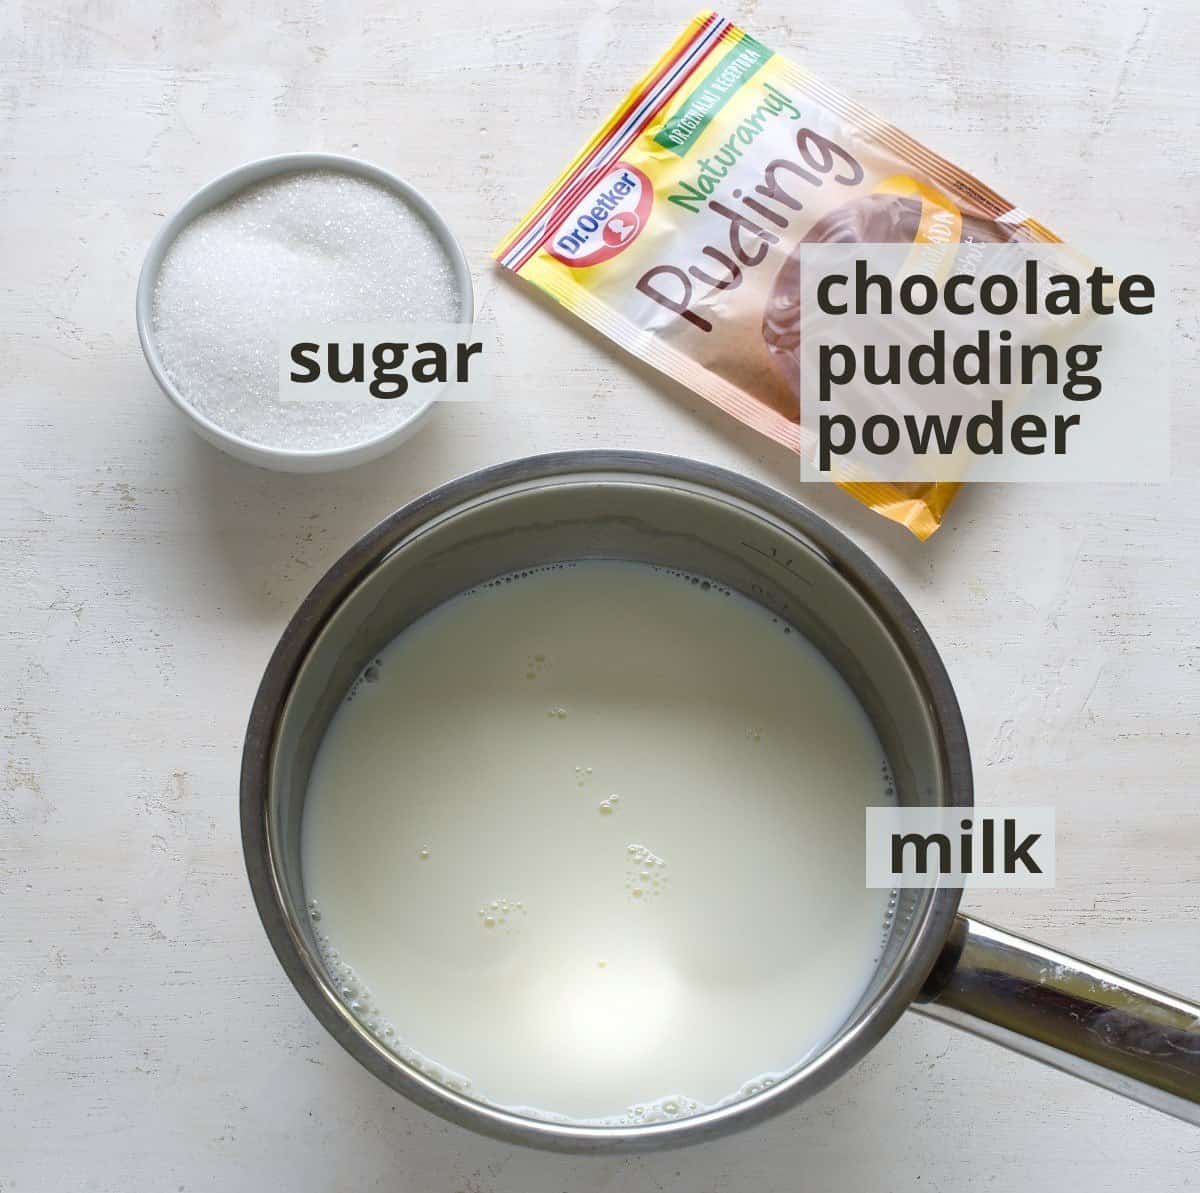 Ingredients to make cooked chocolate pudding with milk, including captions.